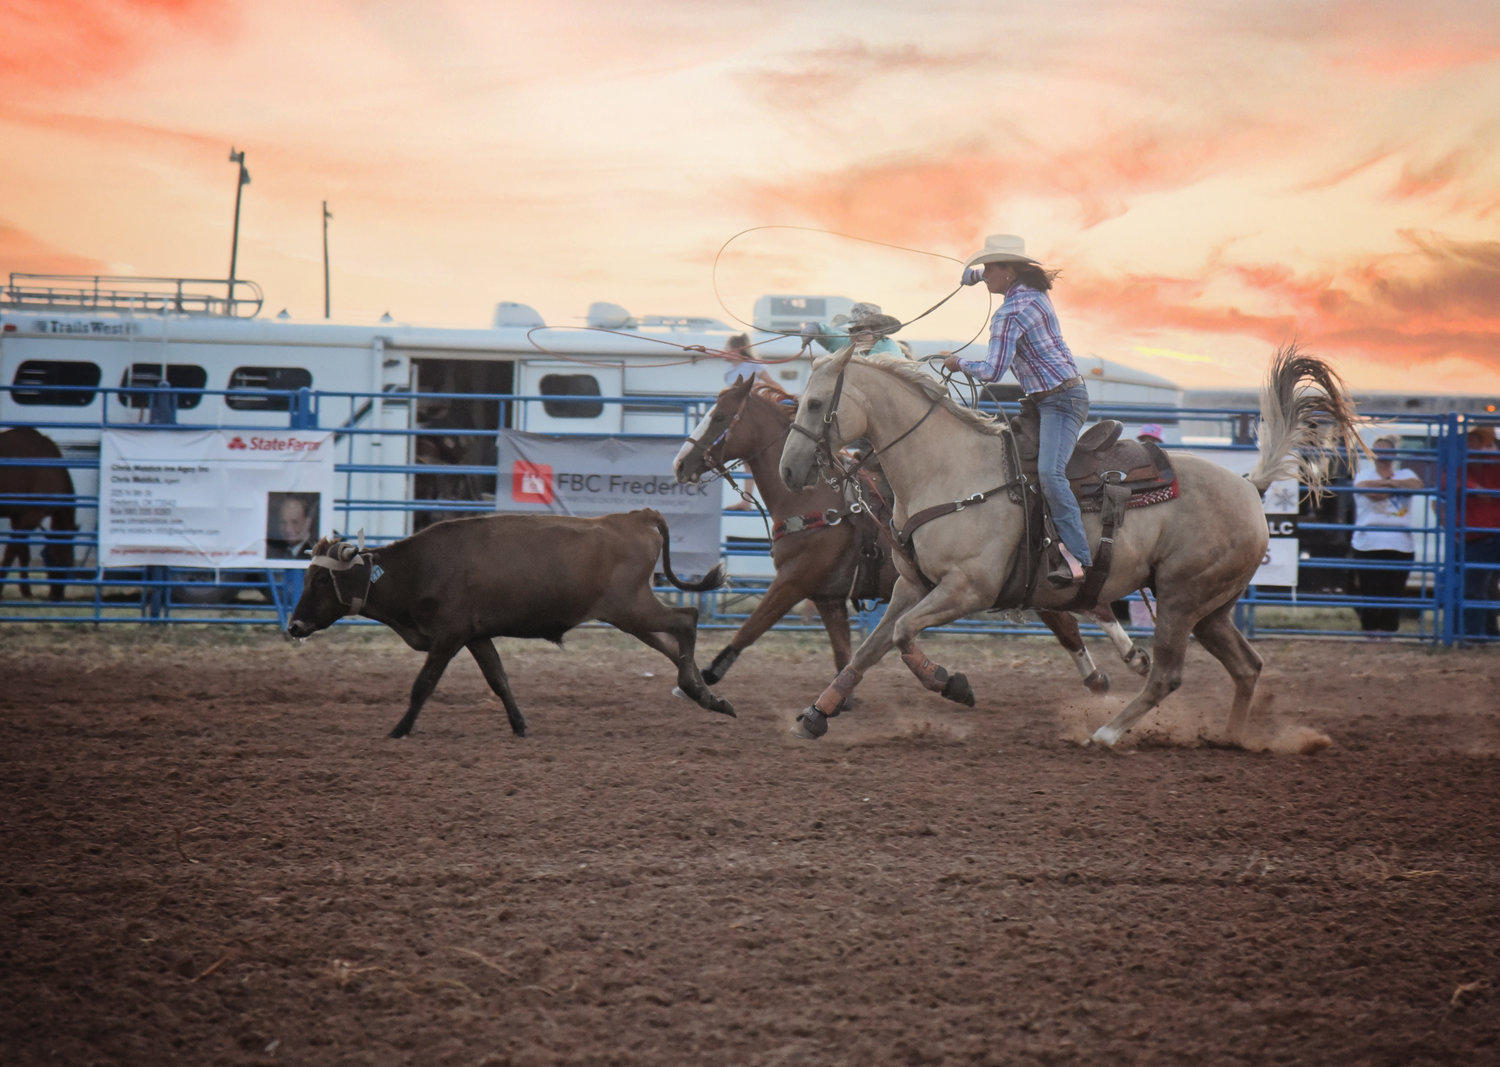 Danna Akin (Frederick) and her partner Criqhett Chapman (Vernon, Texas) partnered up in a roping contest at a rodeo fundraiser held Aug. 5 and Aug. 6, 2022.